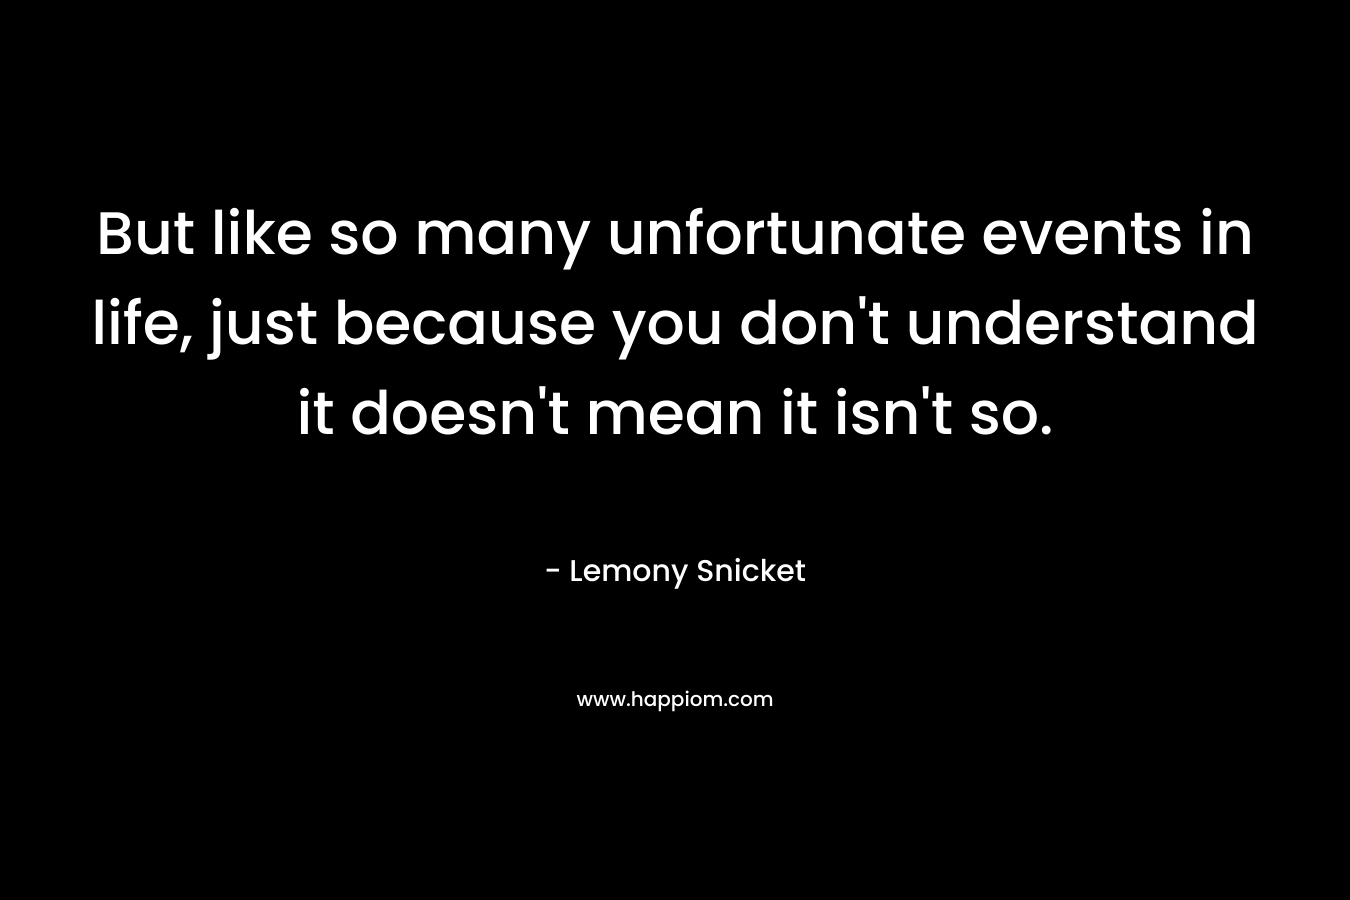 But like so many unfortunate events in life, just because you don't understand it doesn't mean it isn't so.